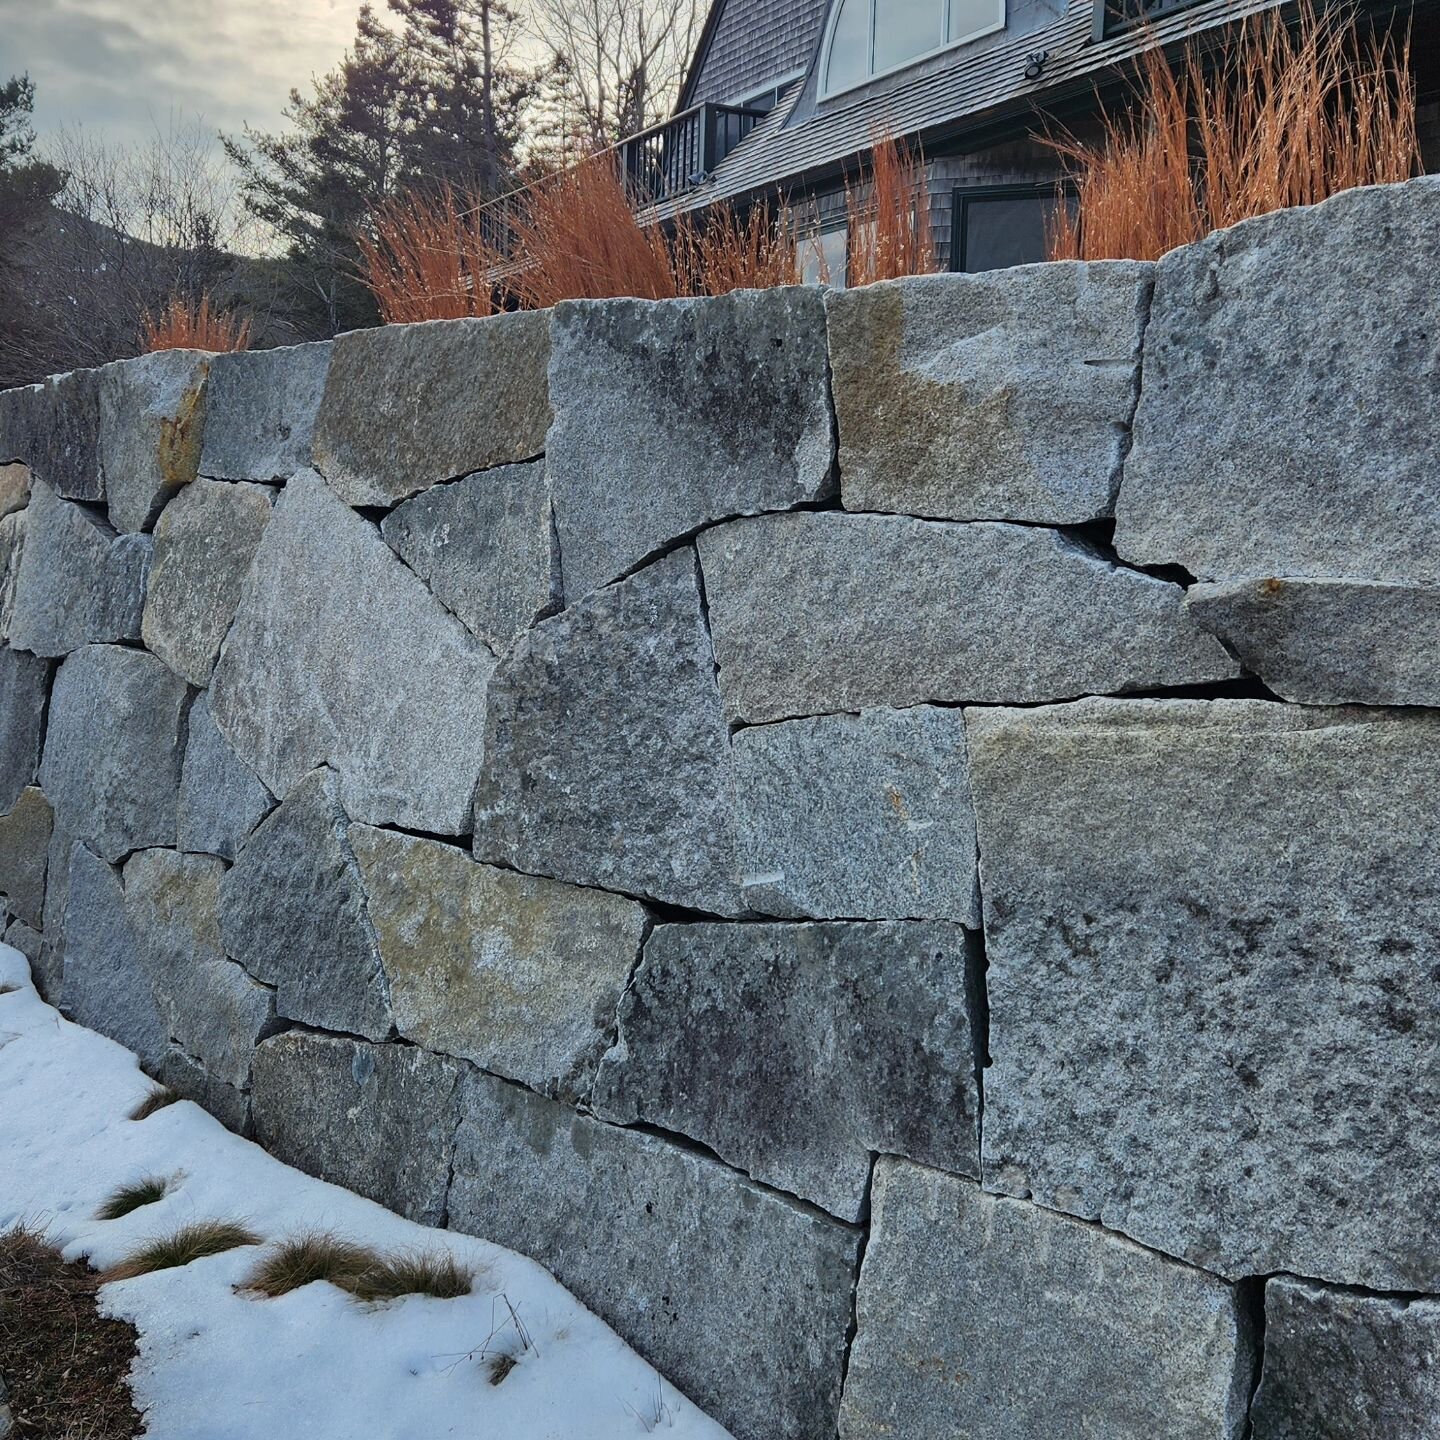 Stone wall and native grasses at Bear Rock give character in the Winter. Bodhi approved. Spend time outside, even when it's cold.
#granite #stonewall #nativeplants #barharbor #winter @acadialandscape